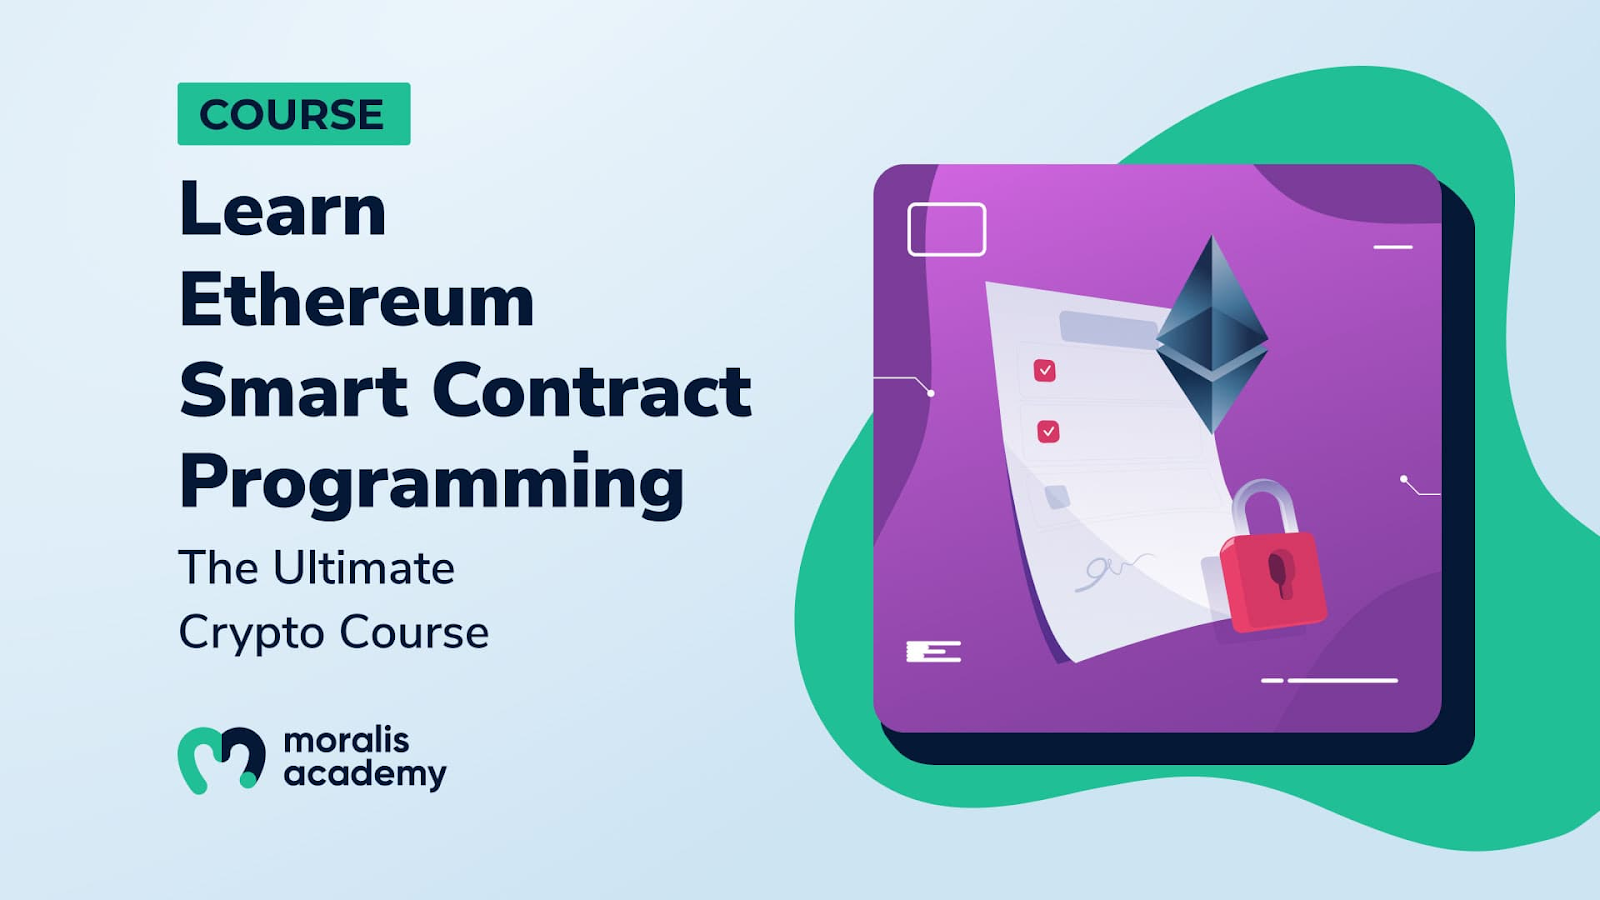 Featured course: Learn Ethereum Smart Contract Programming.